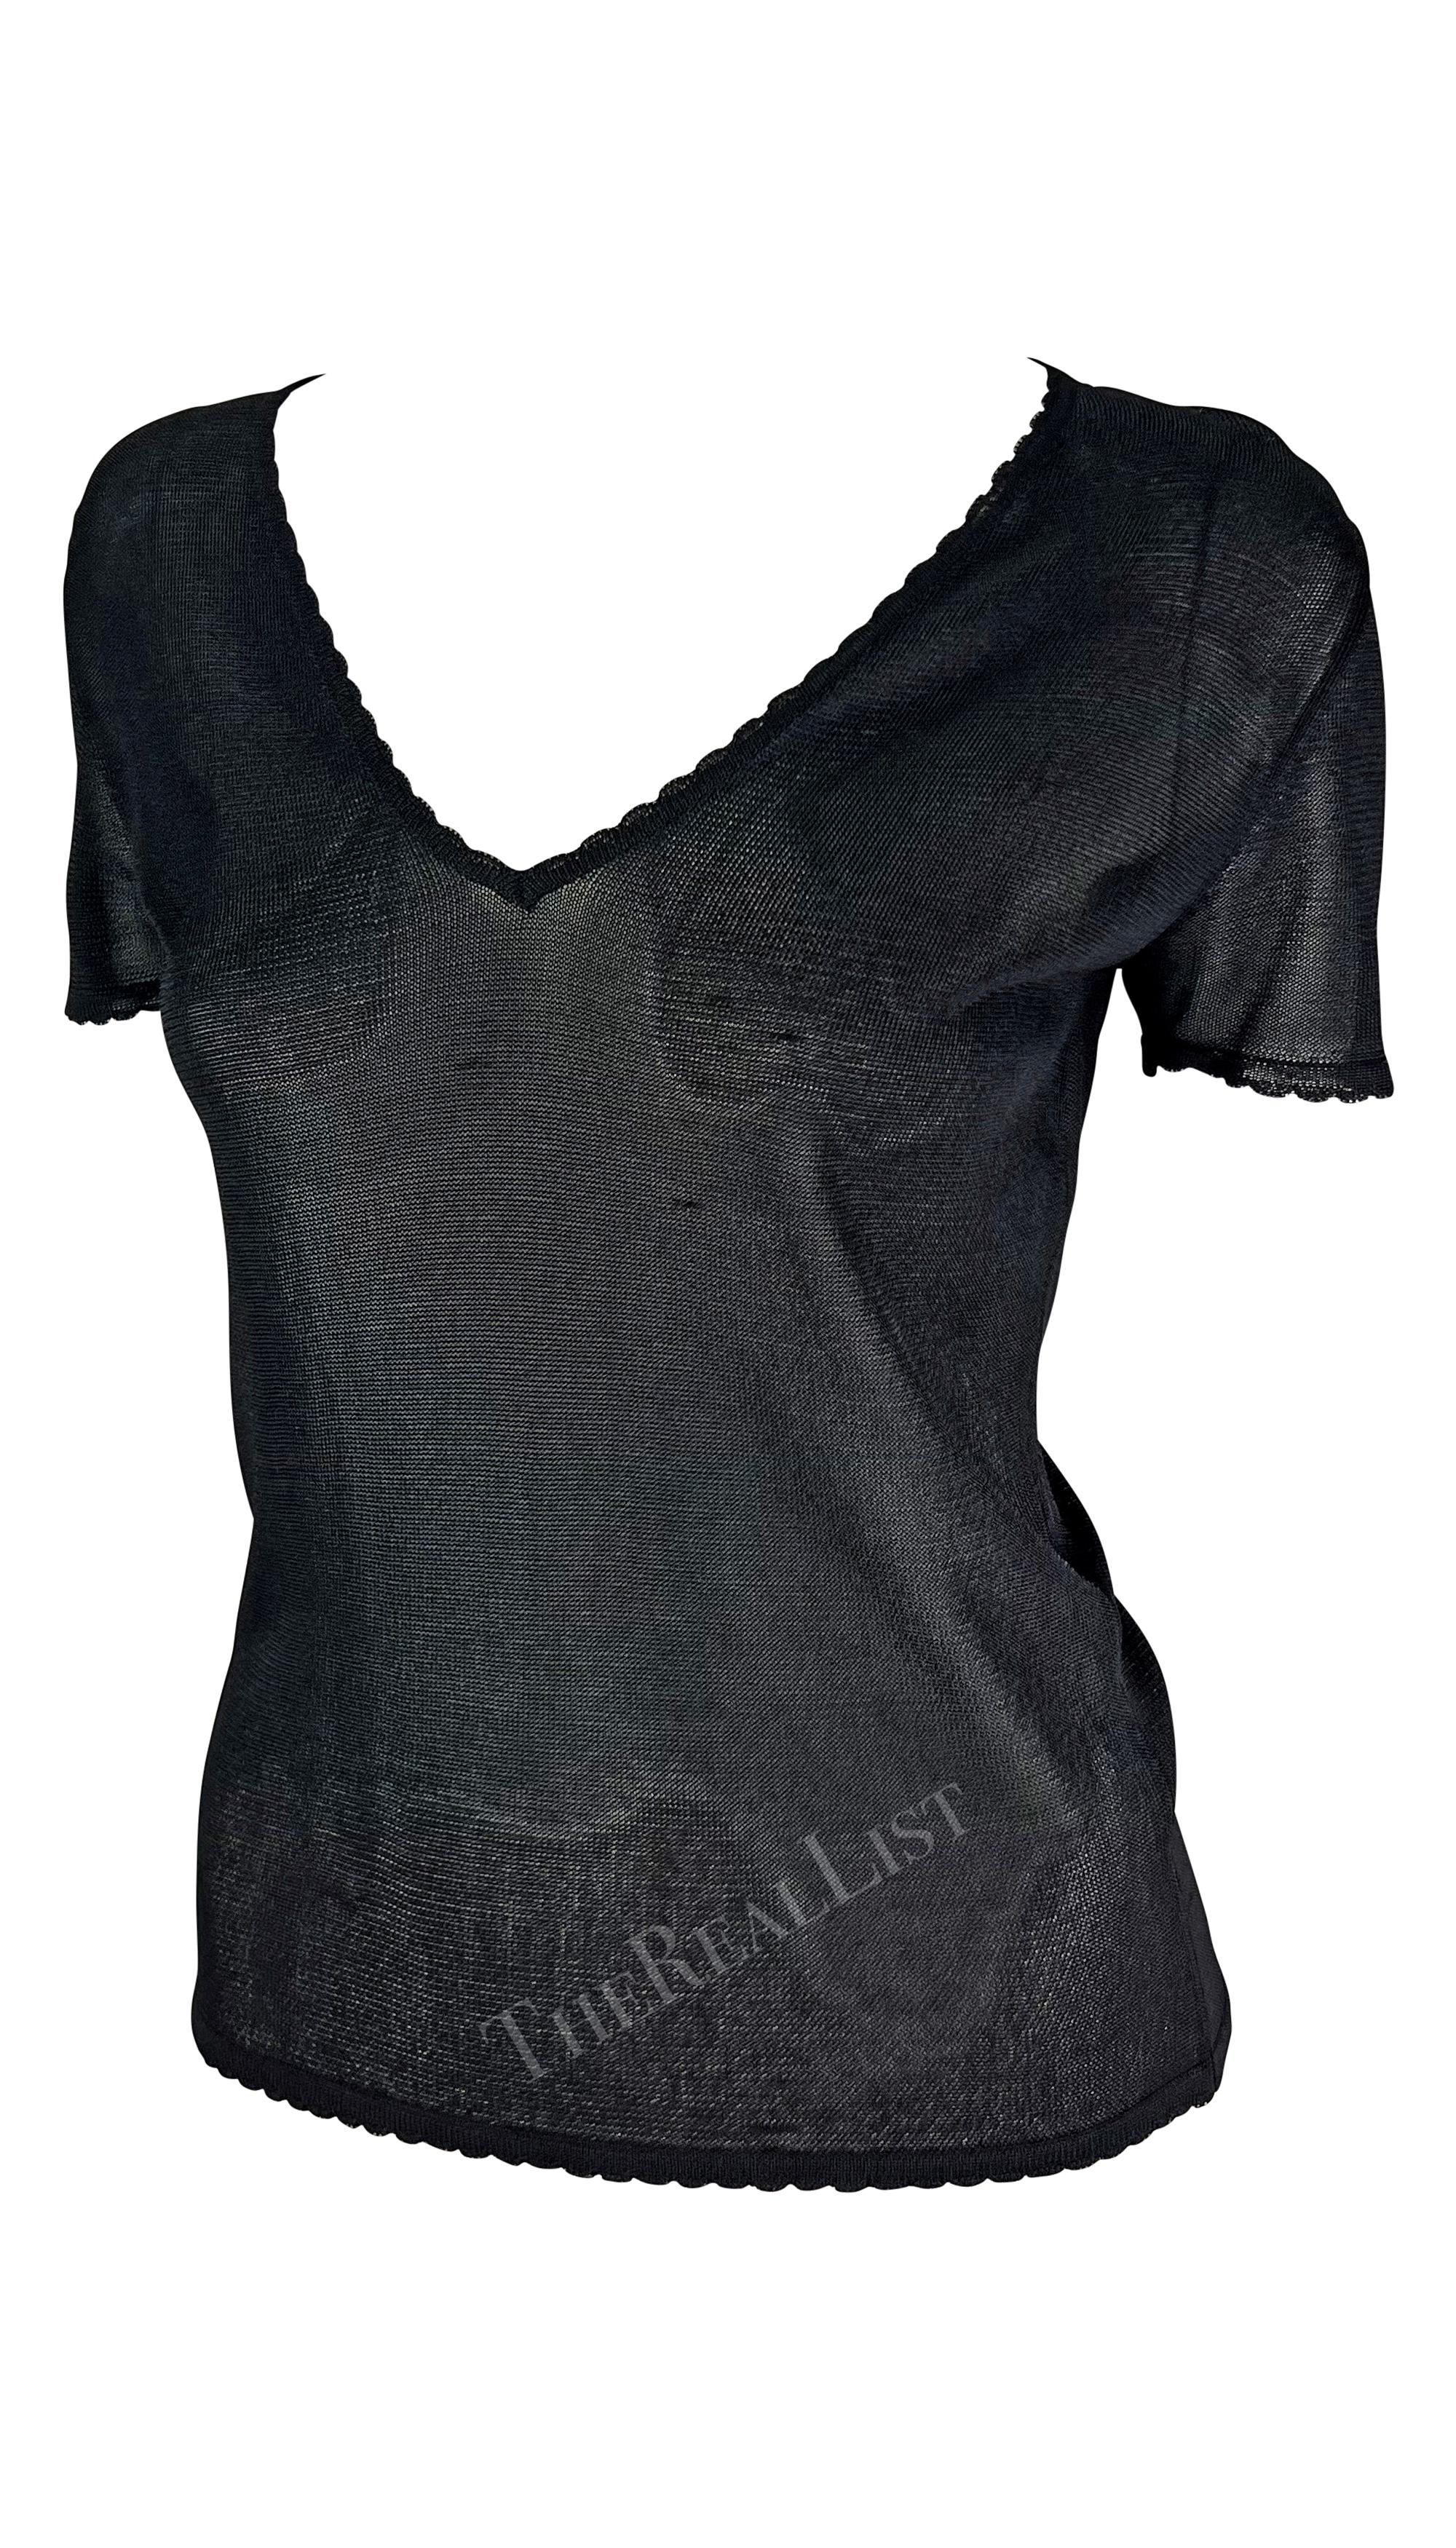 S/S 1997 Gianni Versace Scallop Knit Sheer Viscose V-Neck Black Sweater Top In Excellent Condition For Sale In West Hollywood, CA